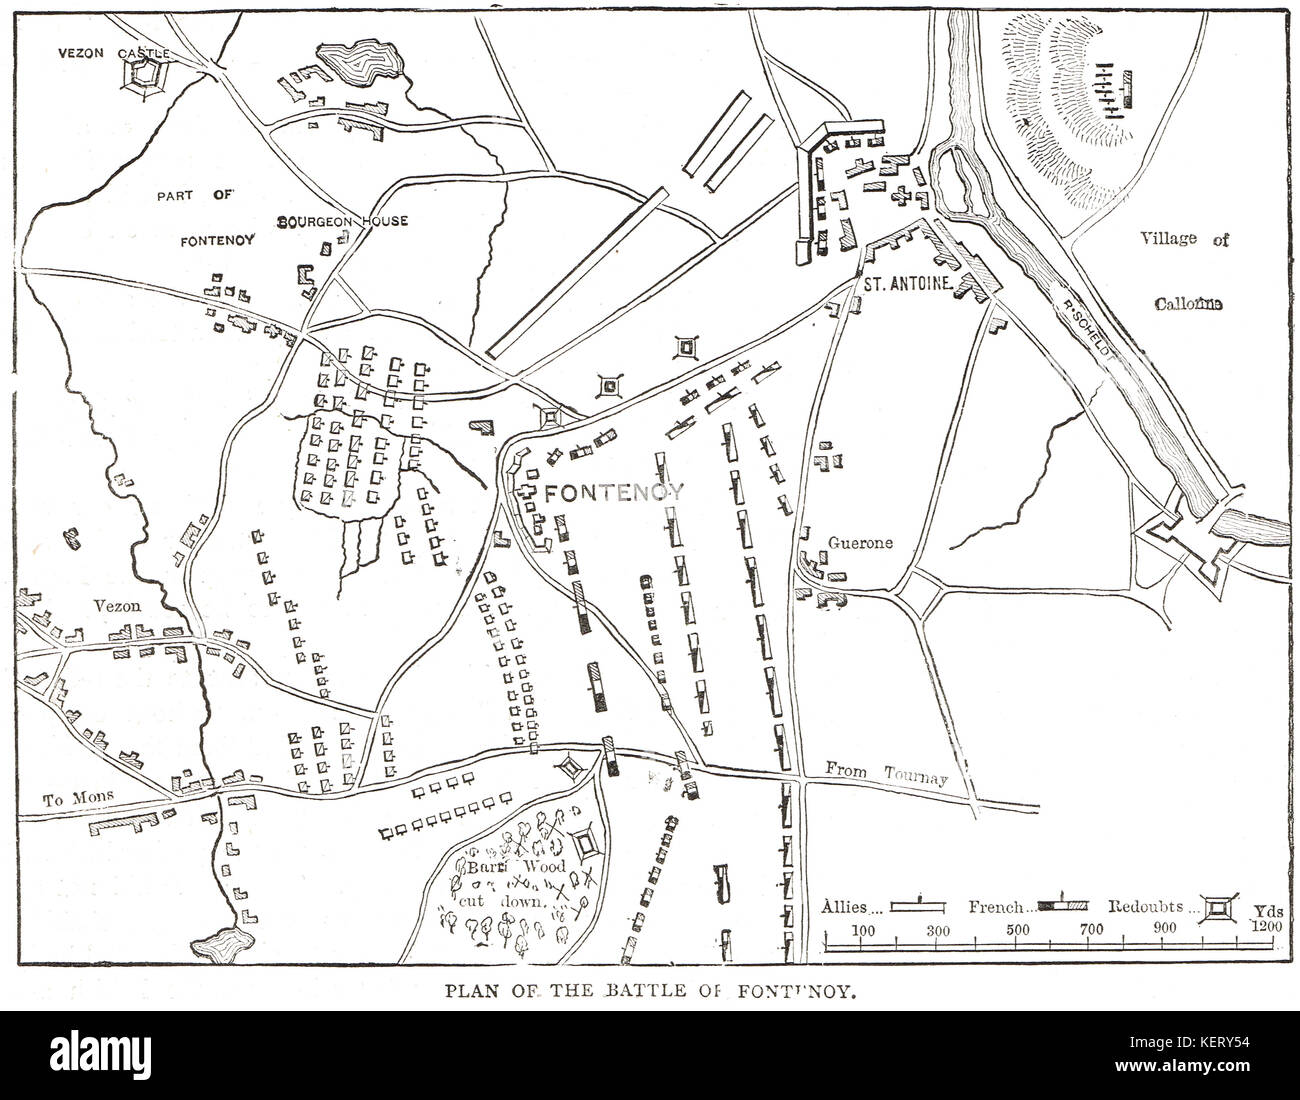 Plan of The Battle of Fontenoy, 11 May 1745 Stock Photo